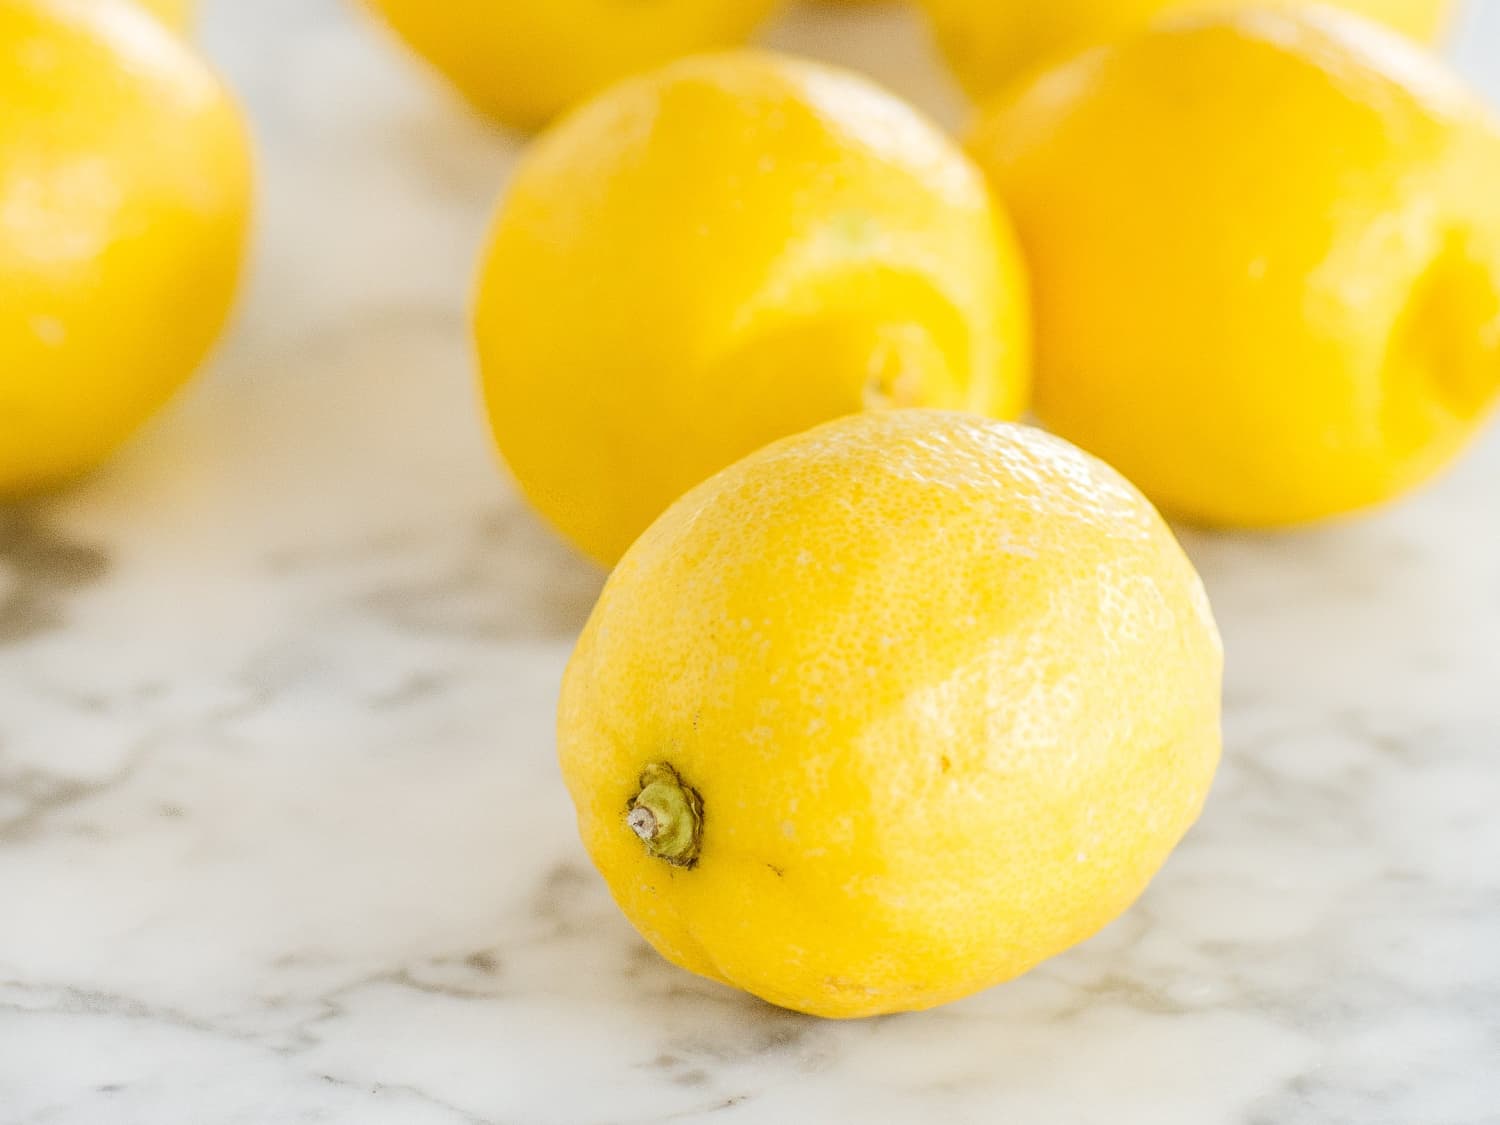 How To Store Lemons So They Stay Fresh Longer